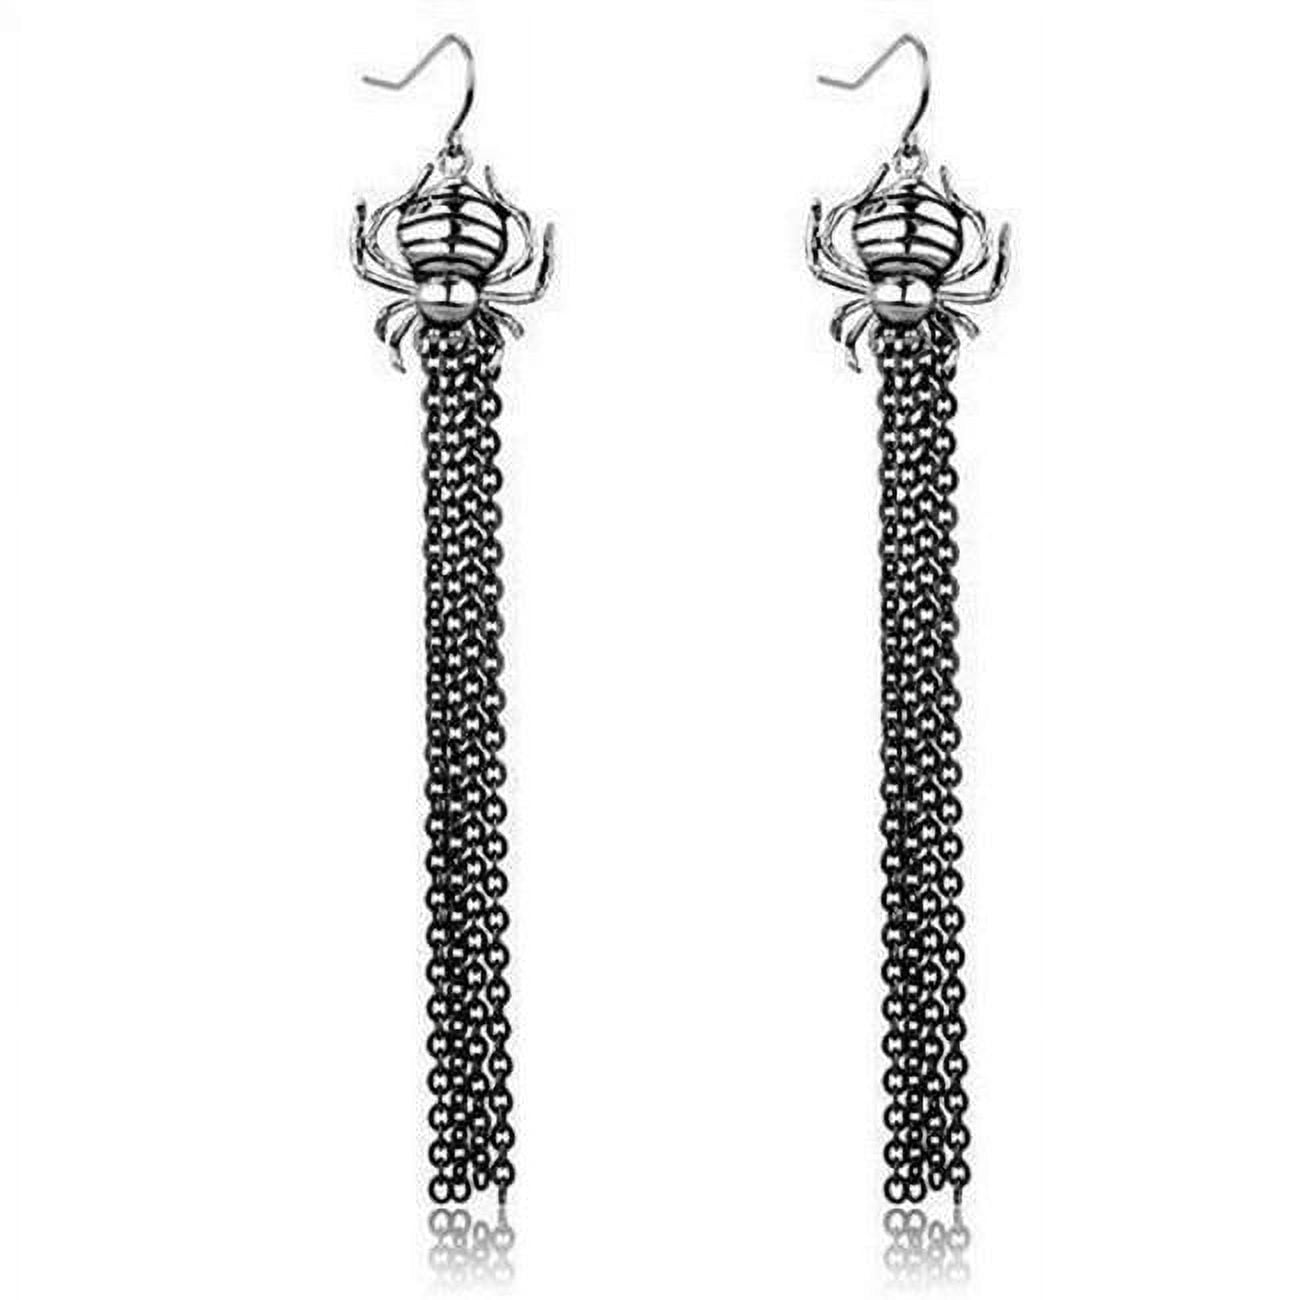 Picture of Alamode TK1481 Two-Tone IP Black Stainless Steel Earrings with Epoxy, Jet